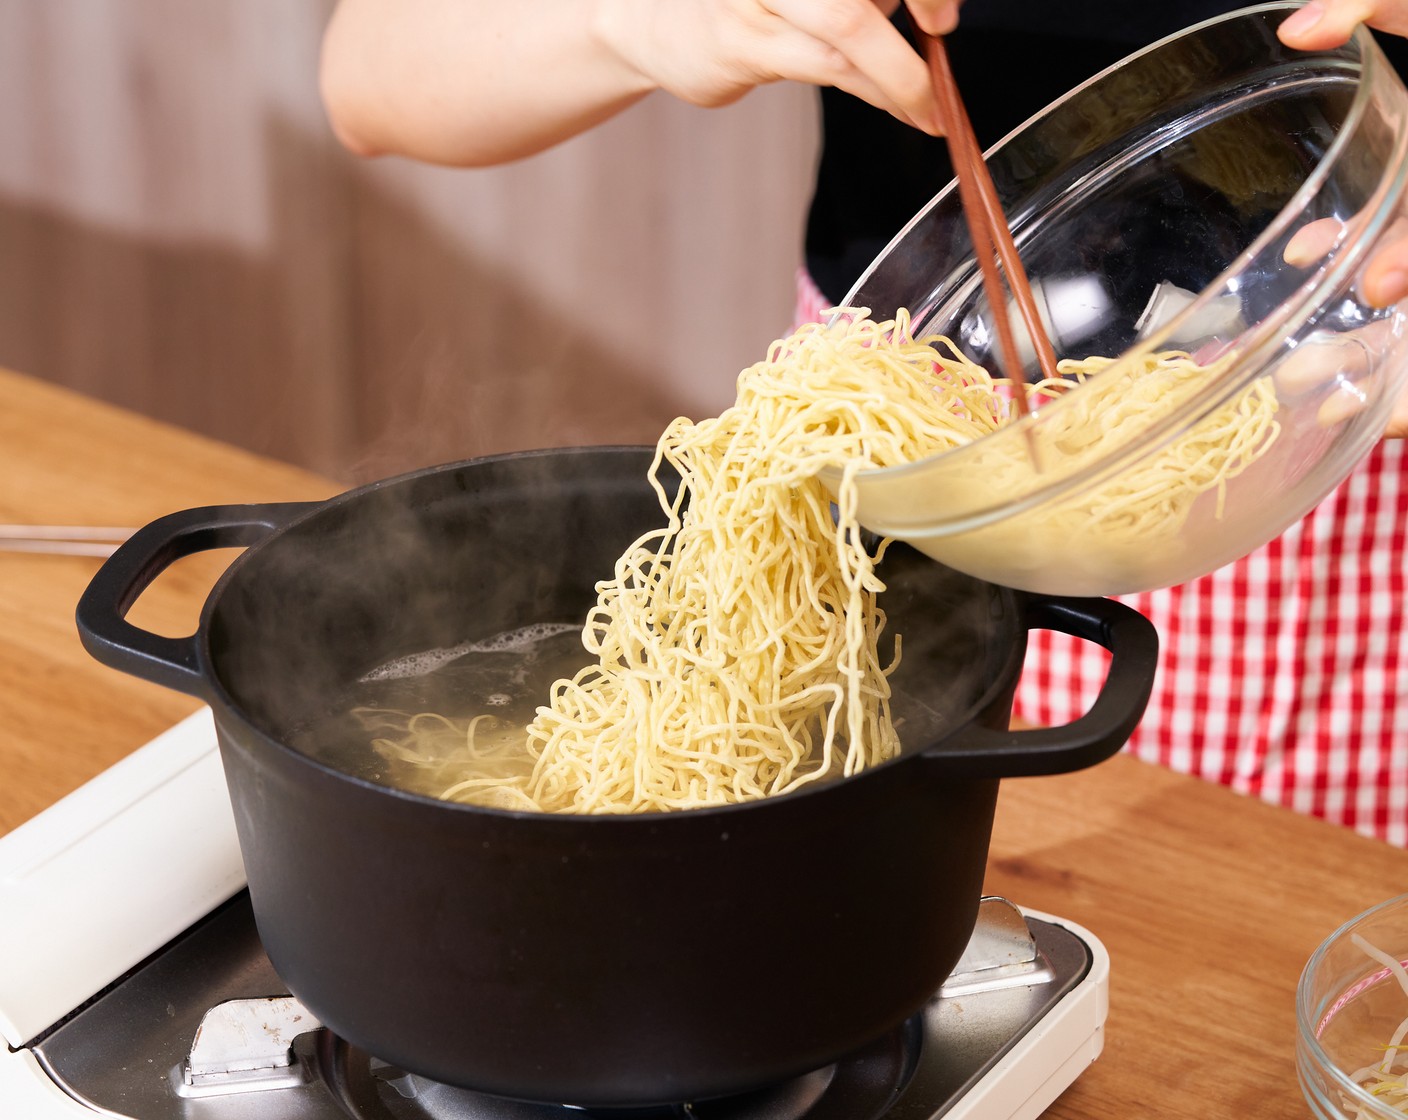 step 1 Cook Chinese Noodles (12 oz) 1 minute less than the package direction. Scoop the noodles into a bowl, and drizzle with Canola Oil (2 Tbsp). Use tongs or chopsticks to pick up noodles and loosen them apart as they cool down.